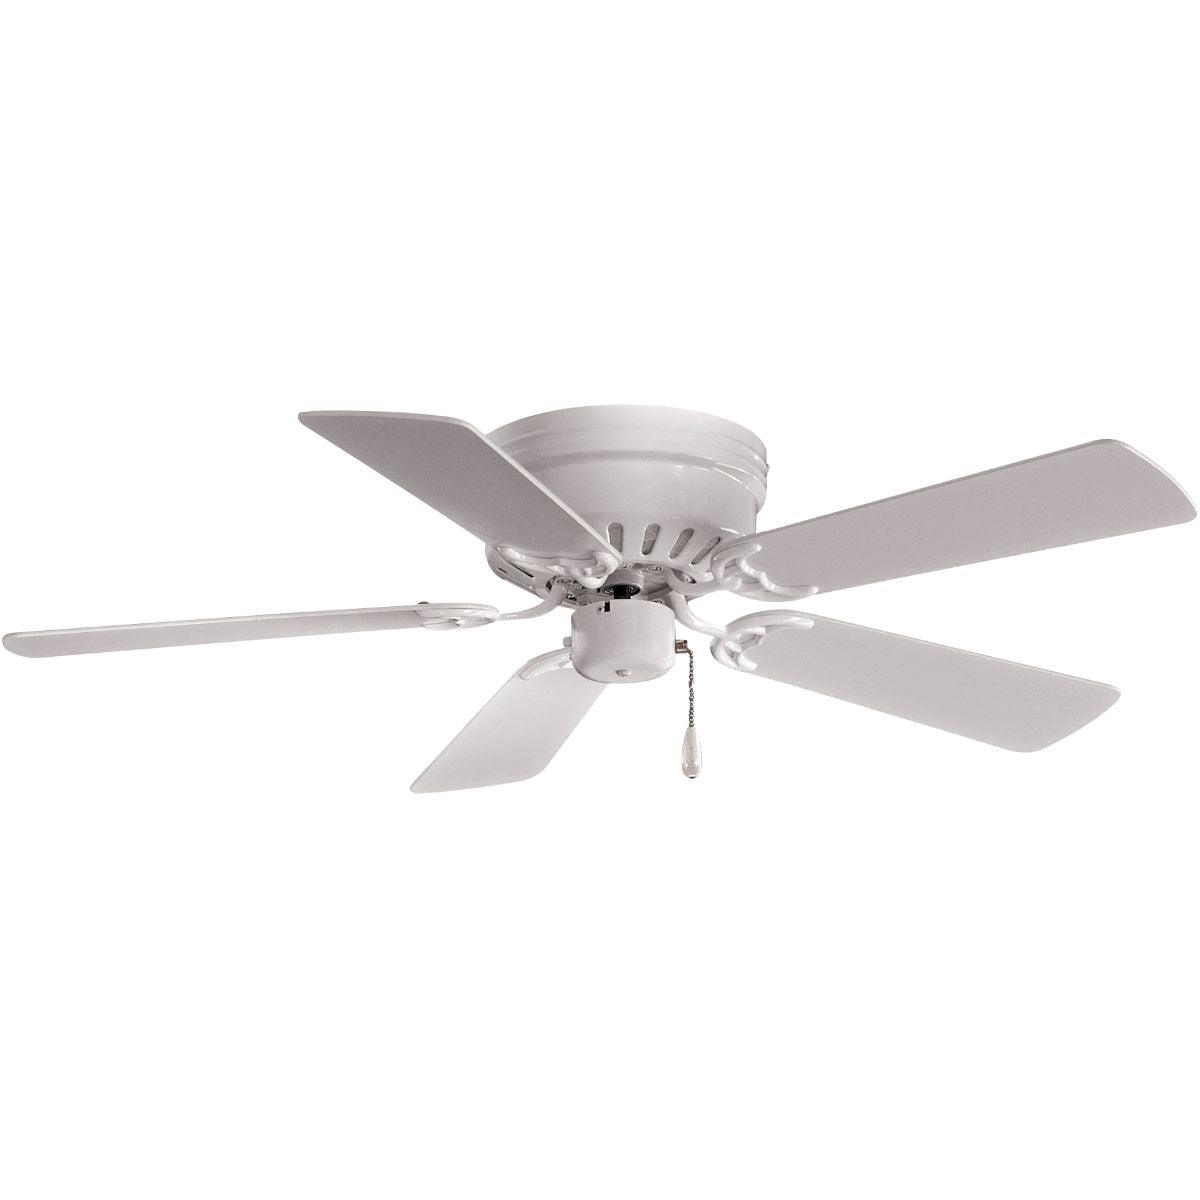 Mesa 42 Inch Ceiling Fan, White Finish, Pull Chain Included - Bees Lighting